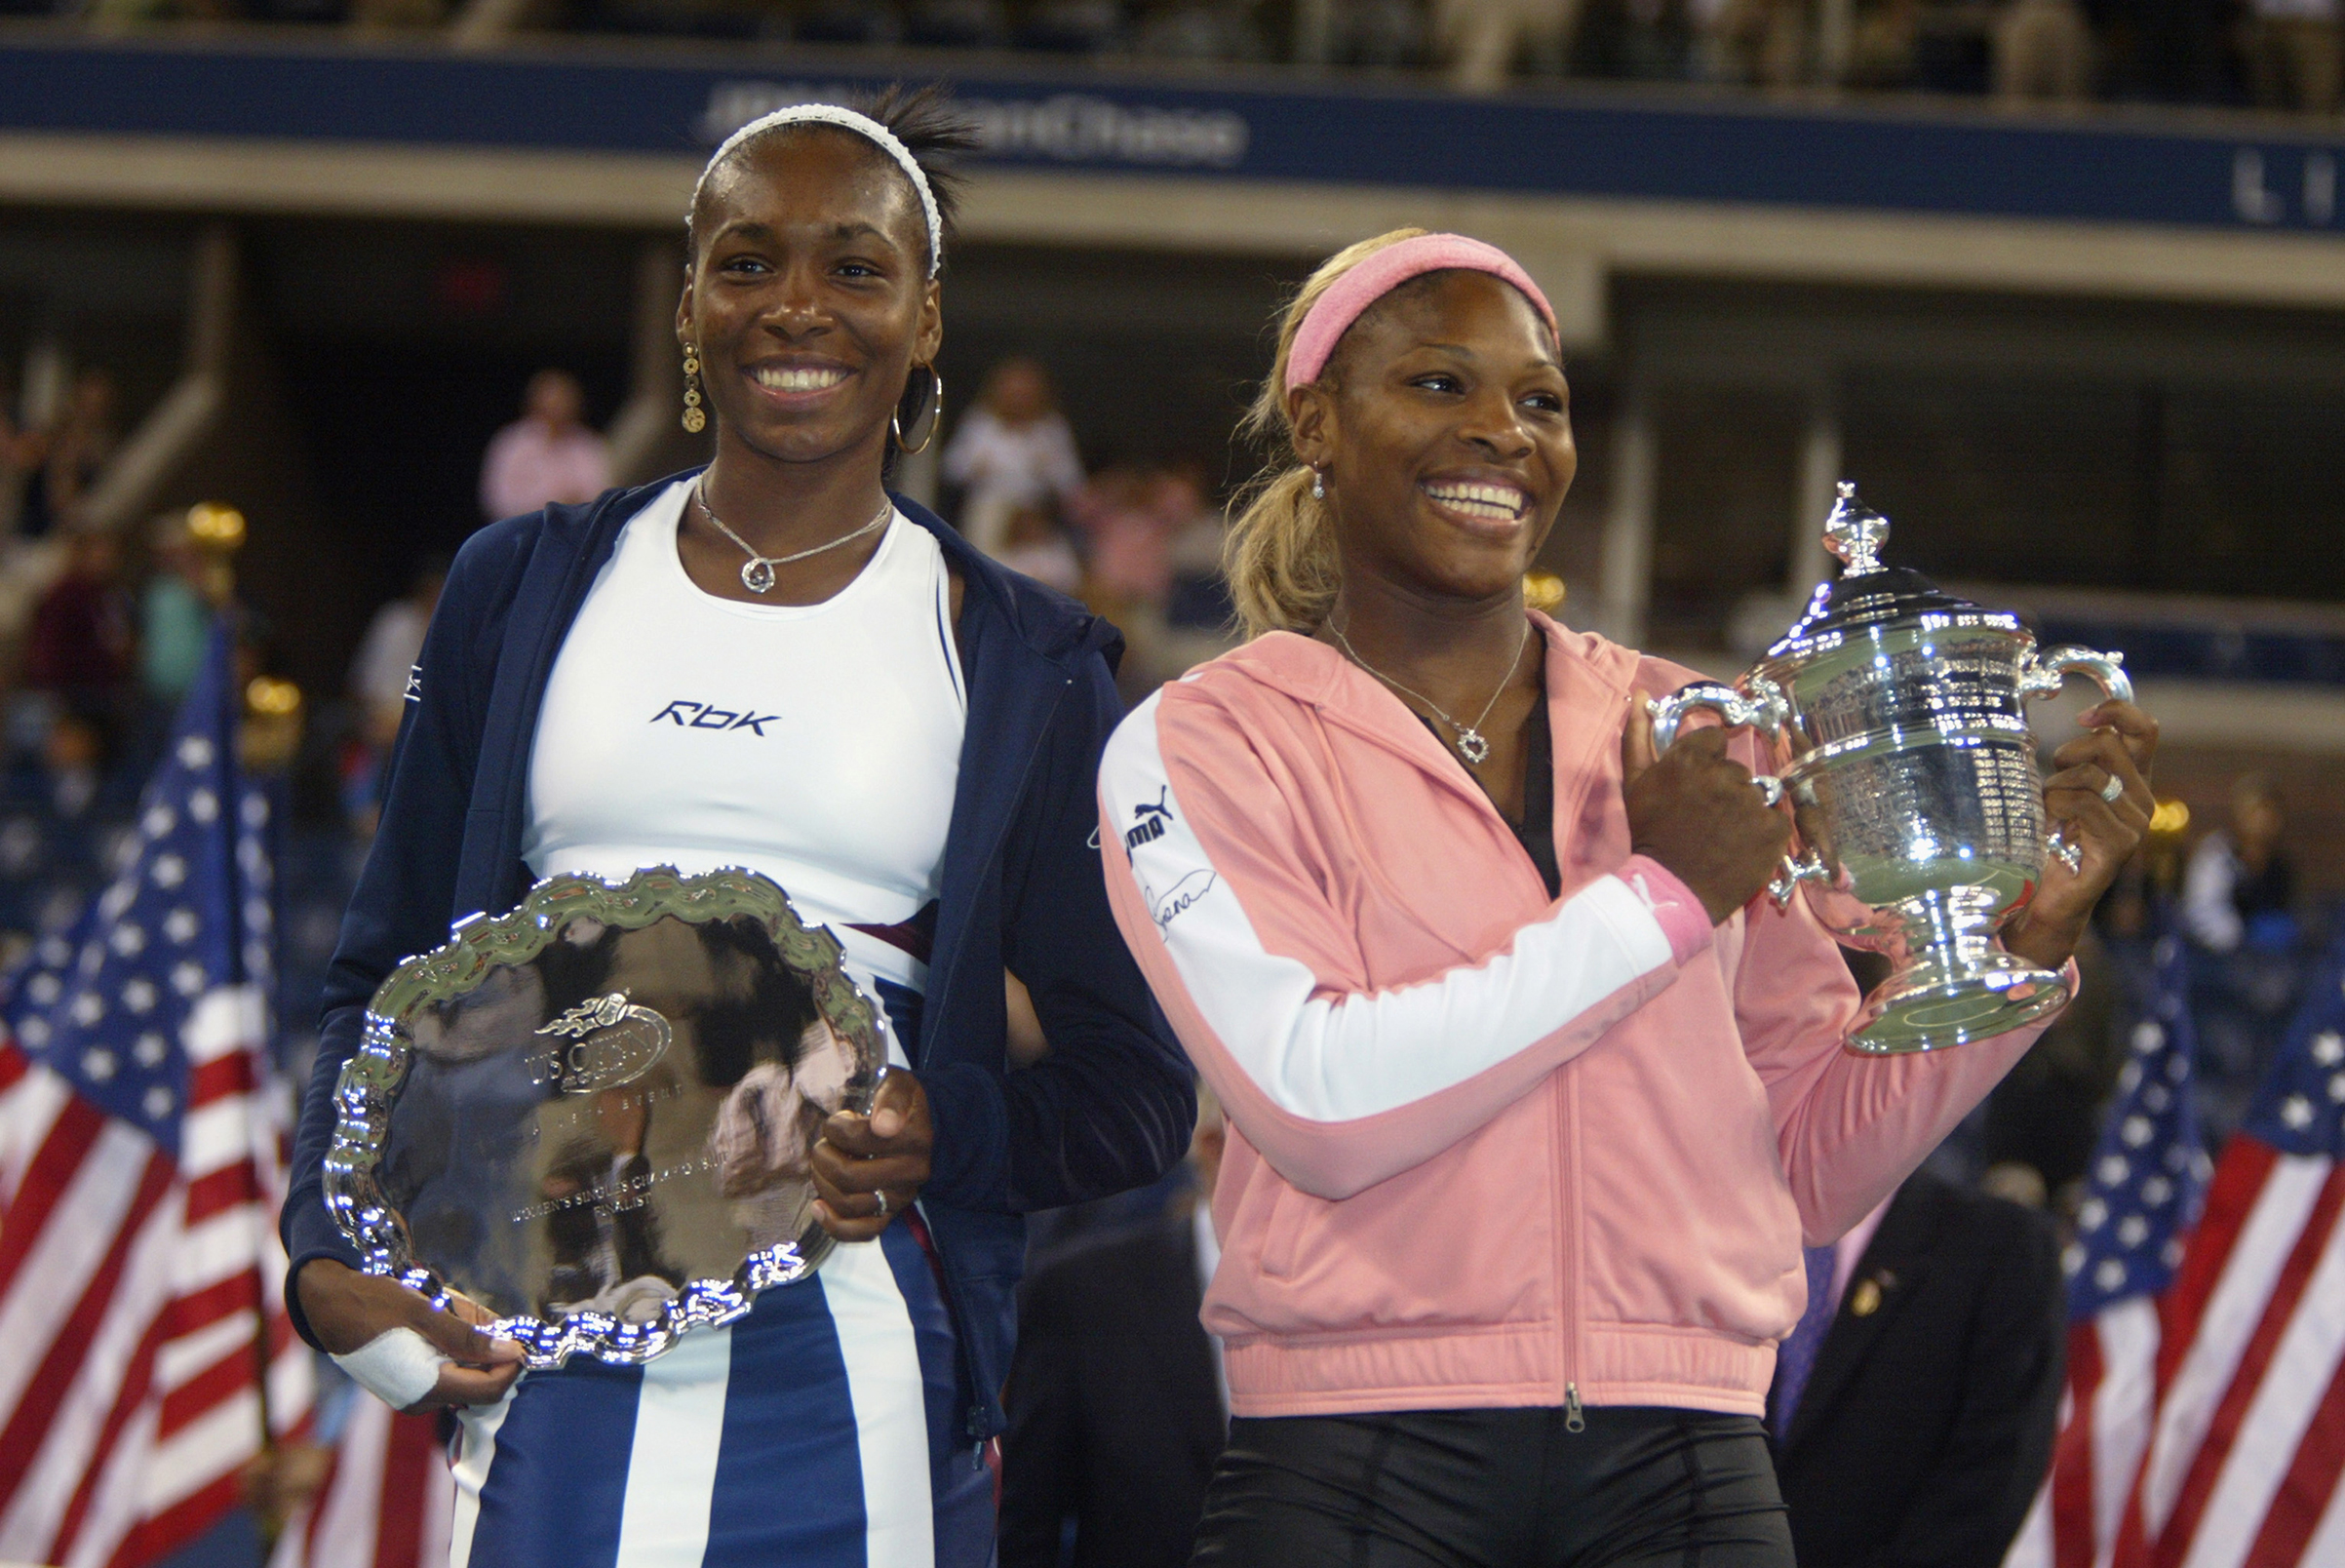 Venus Williams (L) of the USA and Serena Williams of the USA pose for photographers after the women's final of the US Open at the USTA National Tennis Center on September 7, 2002 in Flushing Meadows-Corona Park, New York. Serena Williams defeated her sister and won the US Open. (Al Bello—Getty Images)